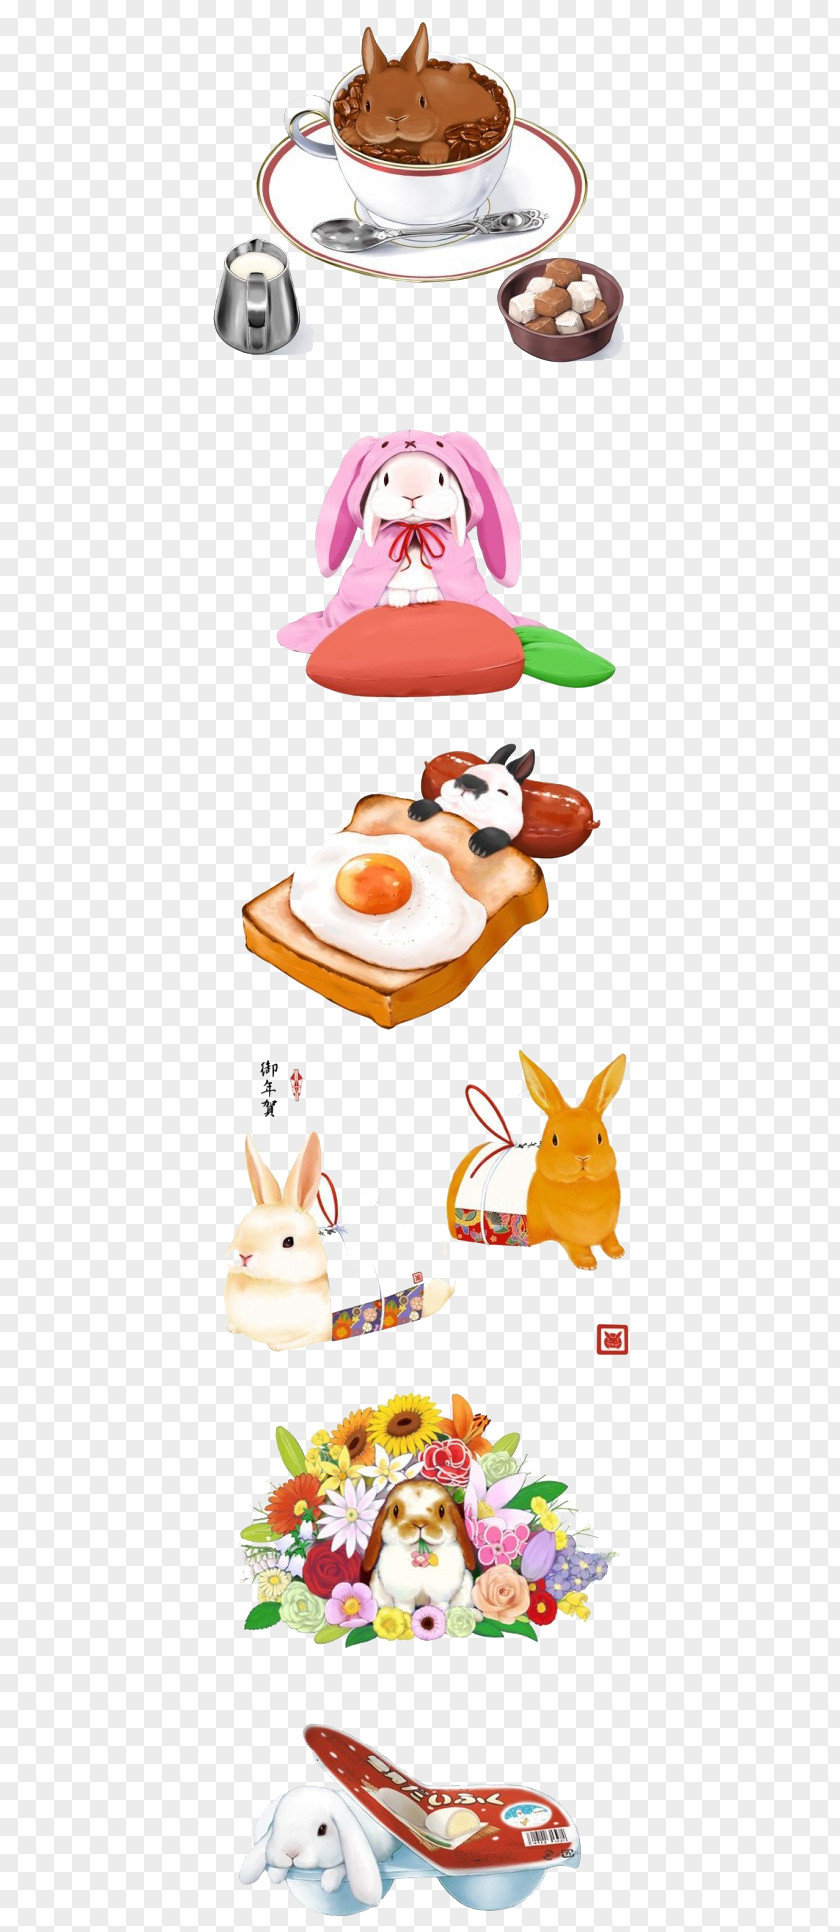 Bunnies Coffee Illustration PNG